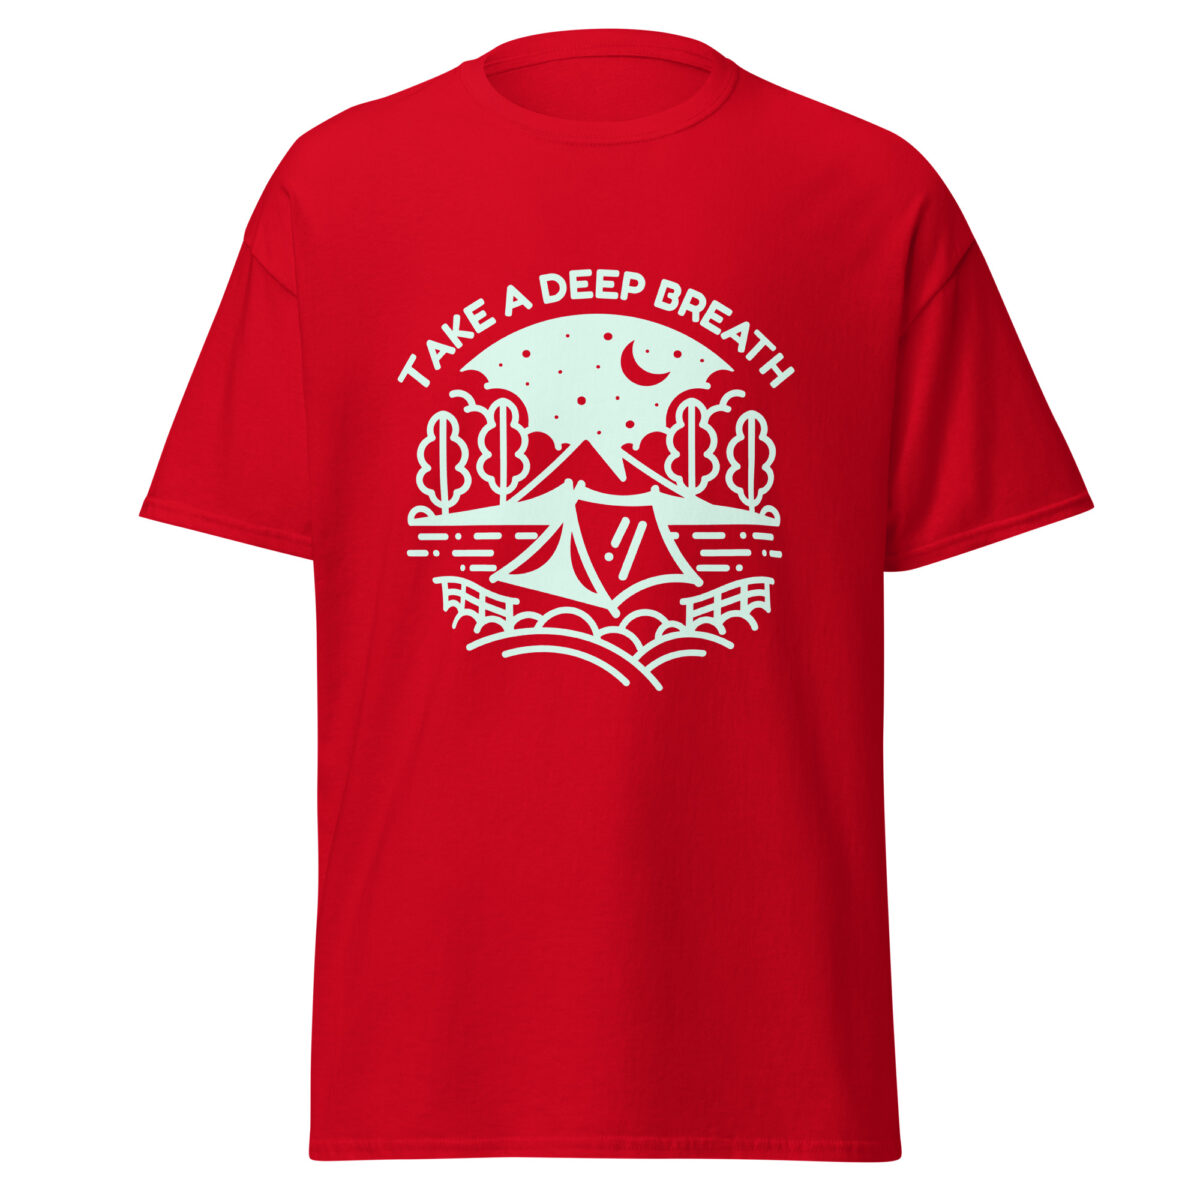 mens classic tee red front 63adf82f8d7a5